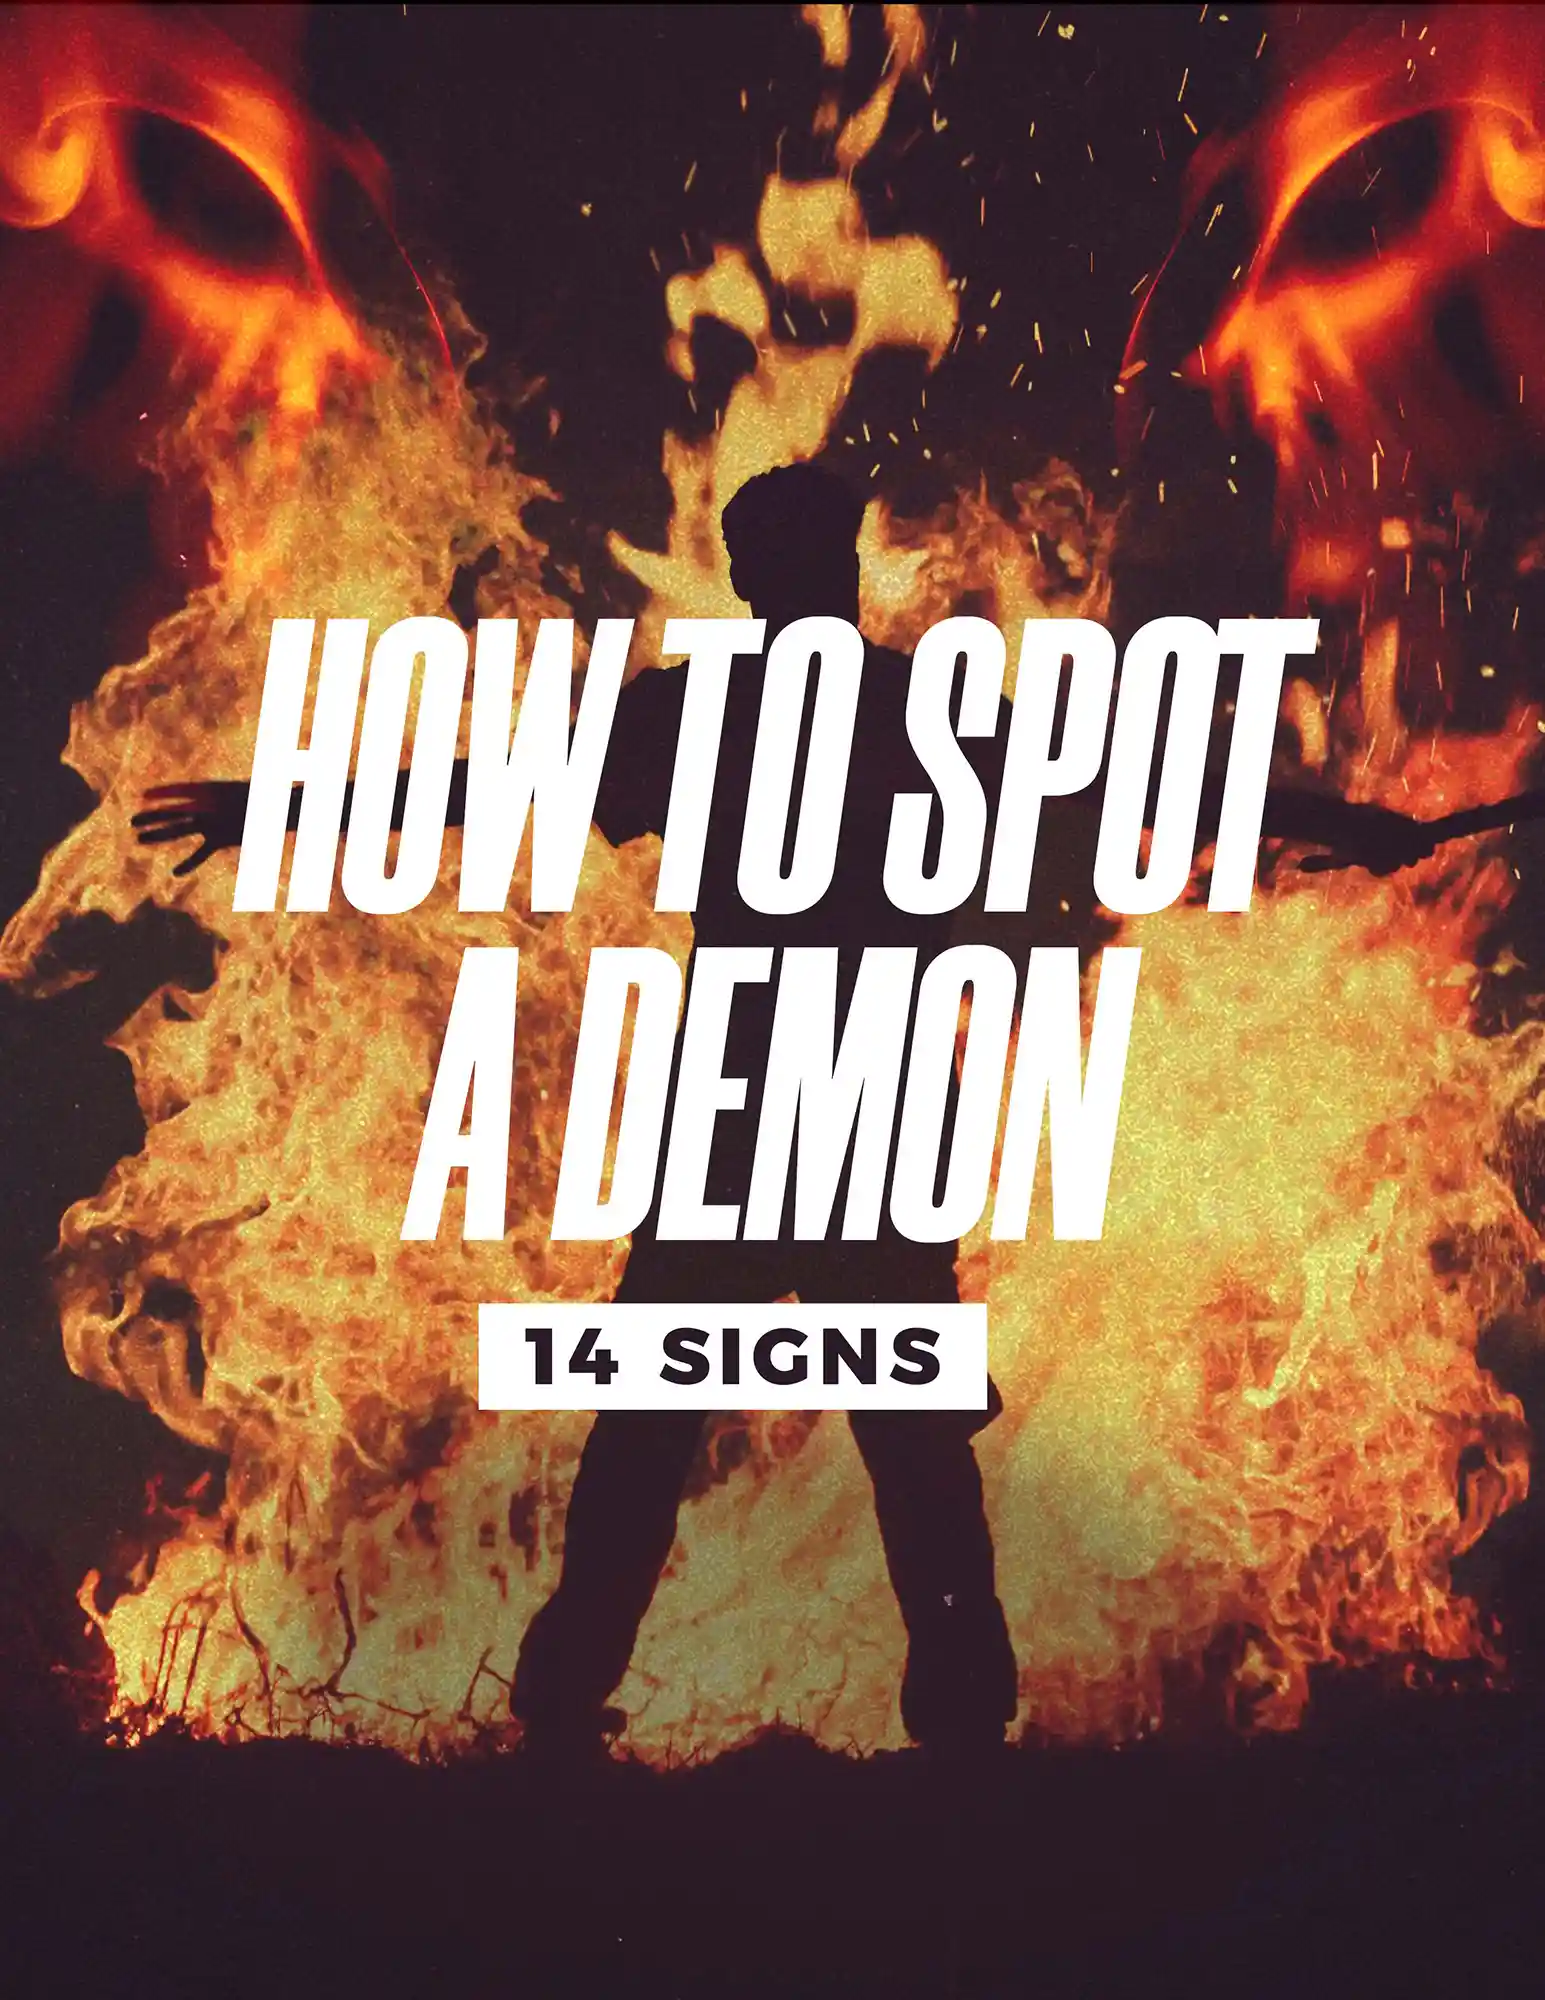 Featured Image for “How to Spot a Demon”